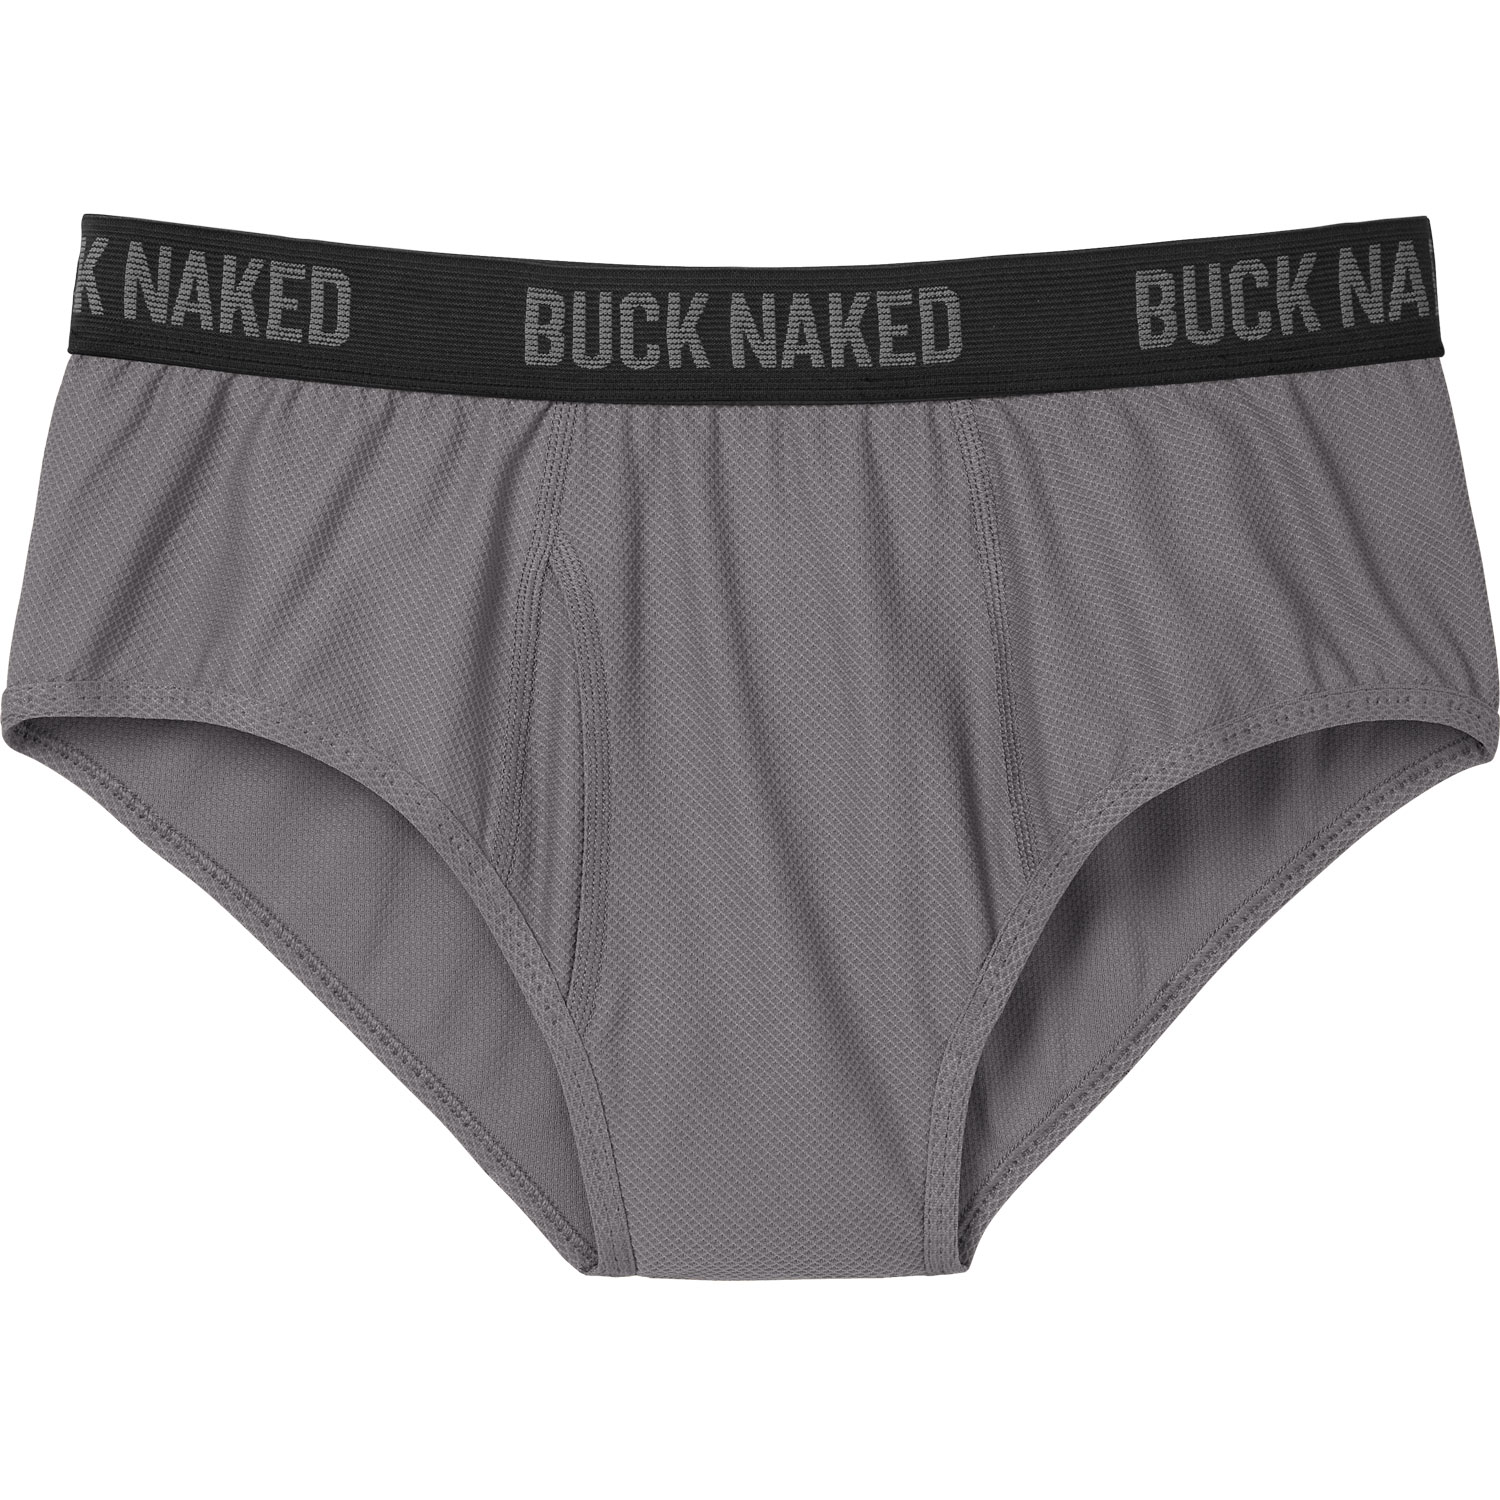 FREE SHIPPING at $50!, Comfort you'll forget you're wearing - $16.50 Buck  Naked™ Underwear SALE!